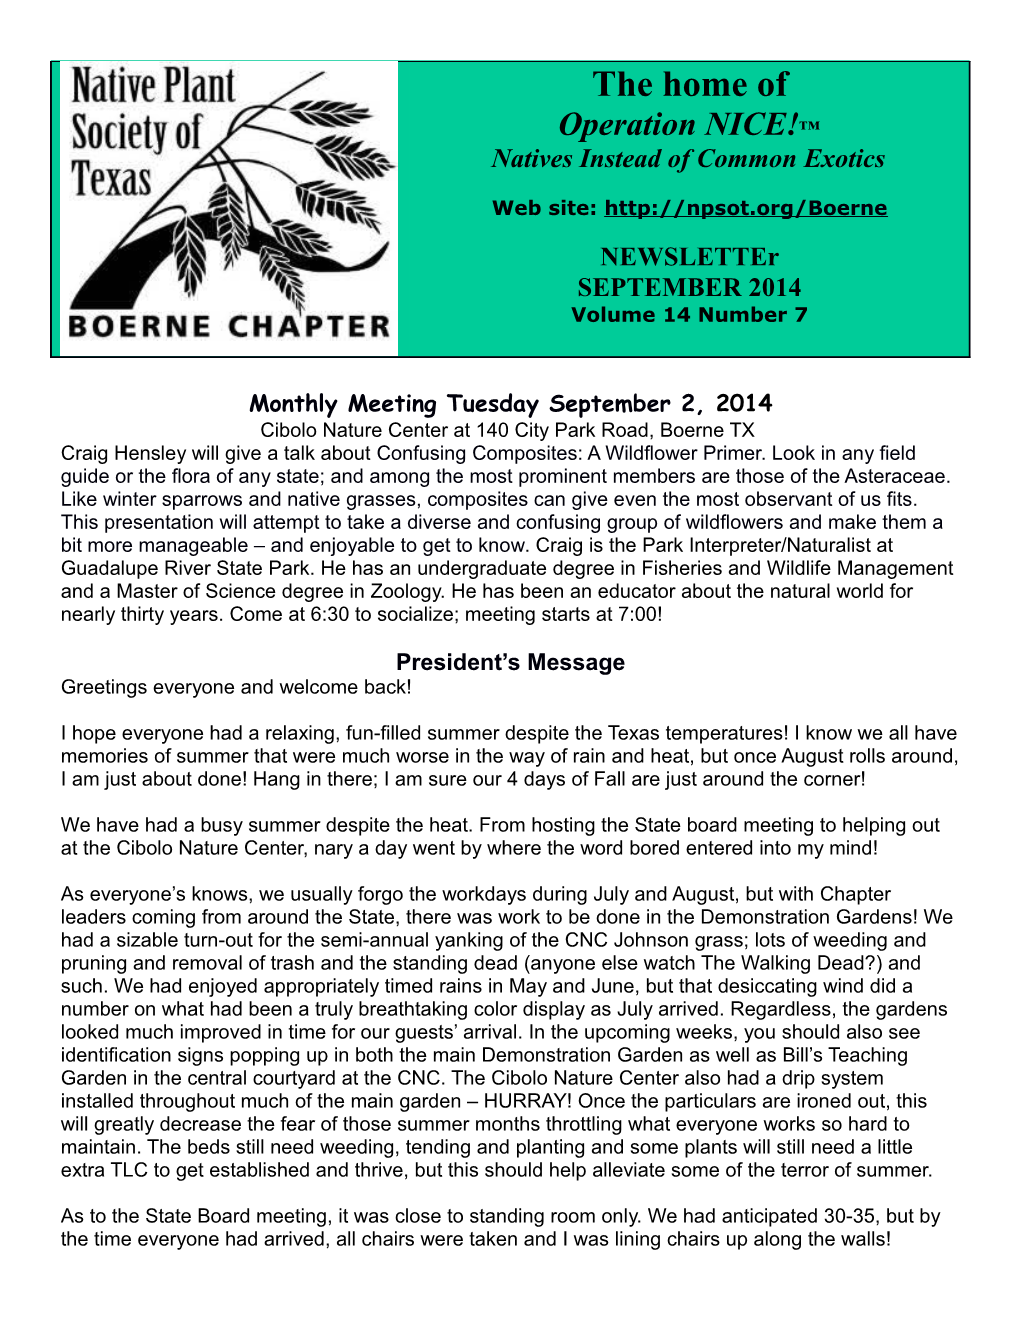 Monthly Meeting Tuesday September 2, 2014